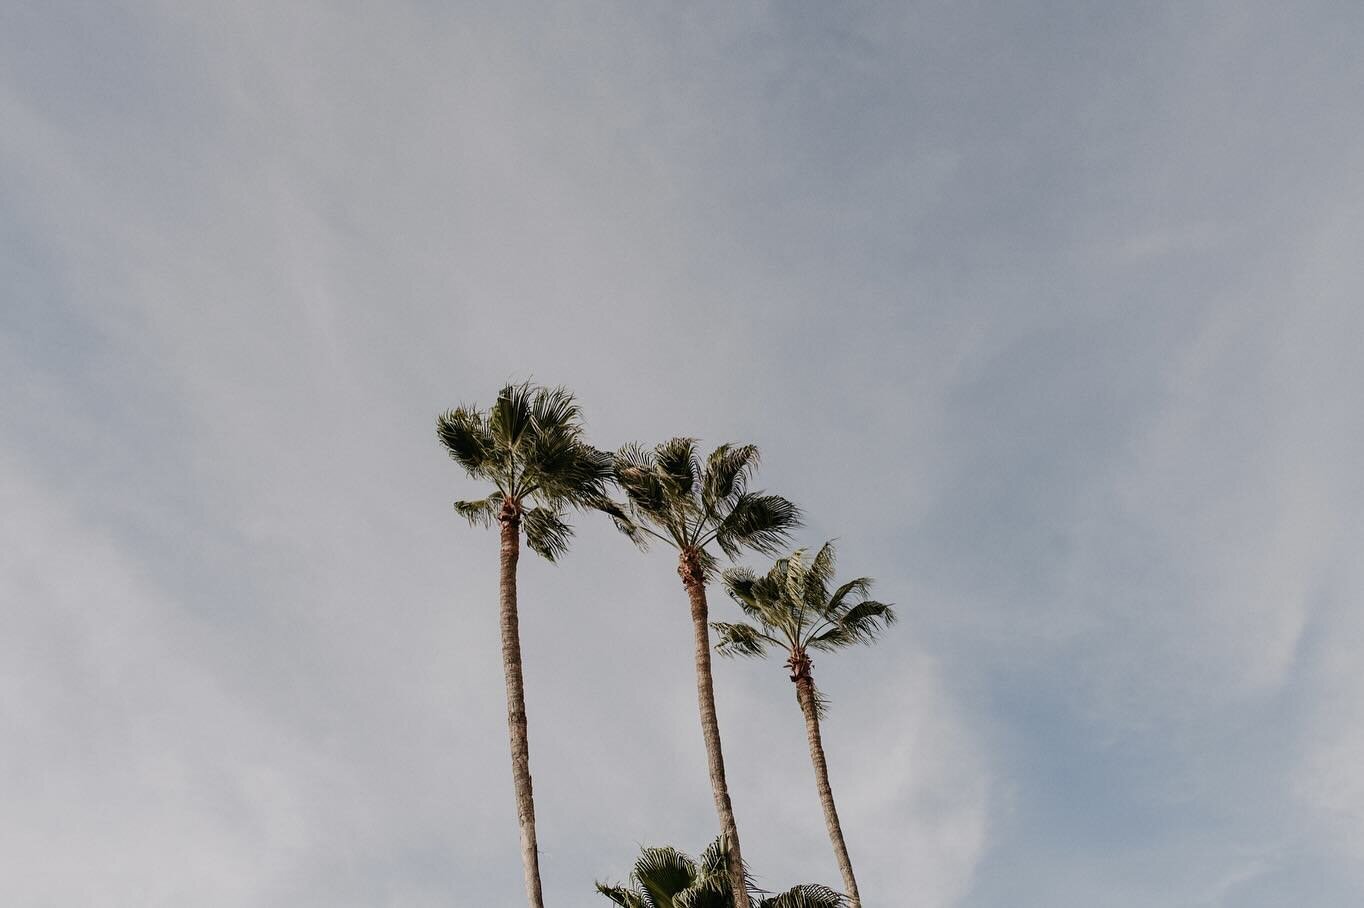 Palm trees and old town vibes, 
From Los Angeles to Baja✨
A lovers&rsquo; engagement session❤️&zwj;🔥

.

.

.

#todossantos #todossantoswedding #todossantosweddingphotographer #todossantosengagement #bajaweddingphotographer #bajaweddingplanner #cabo